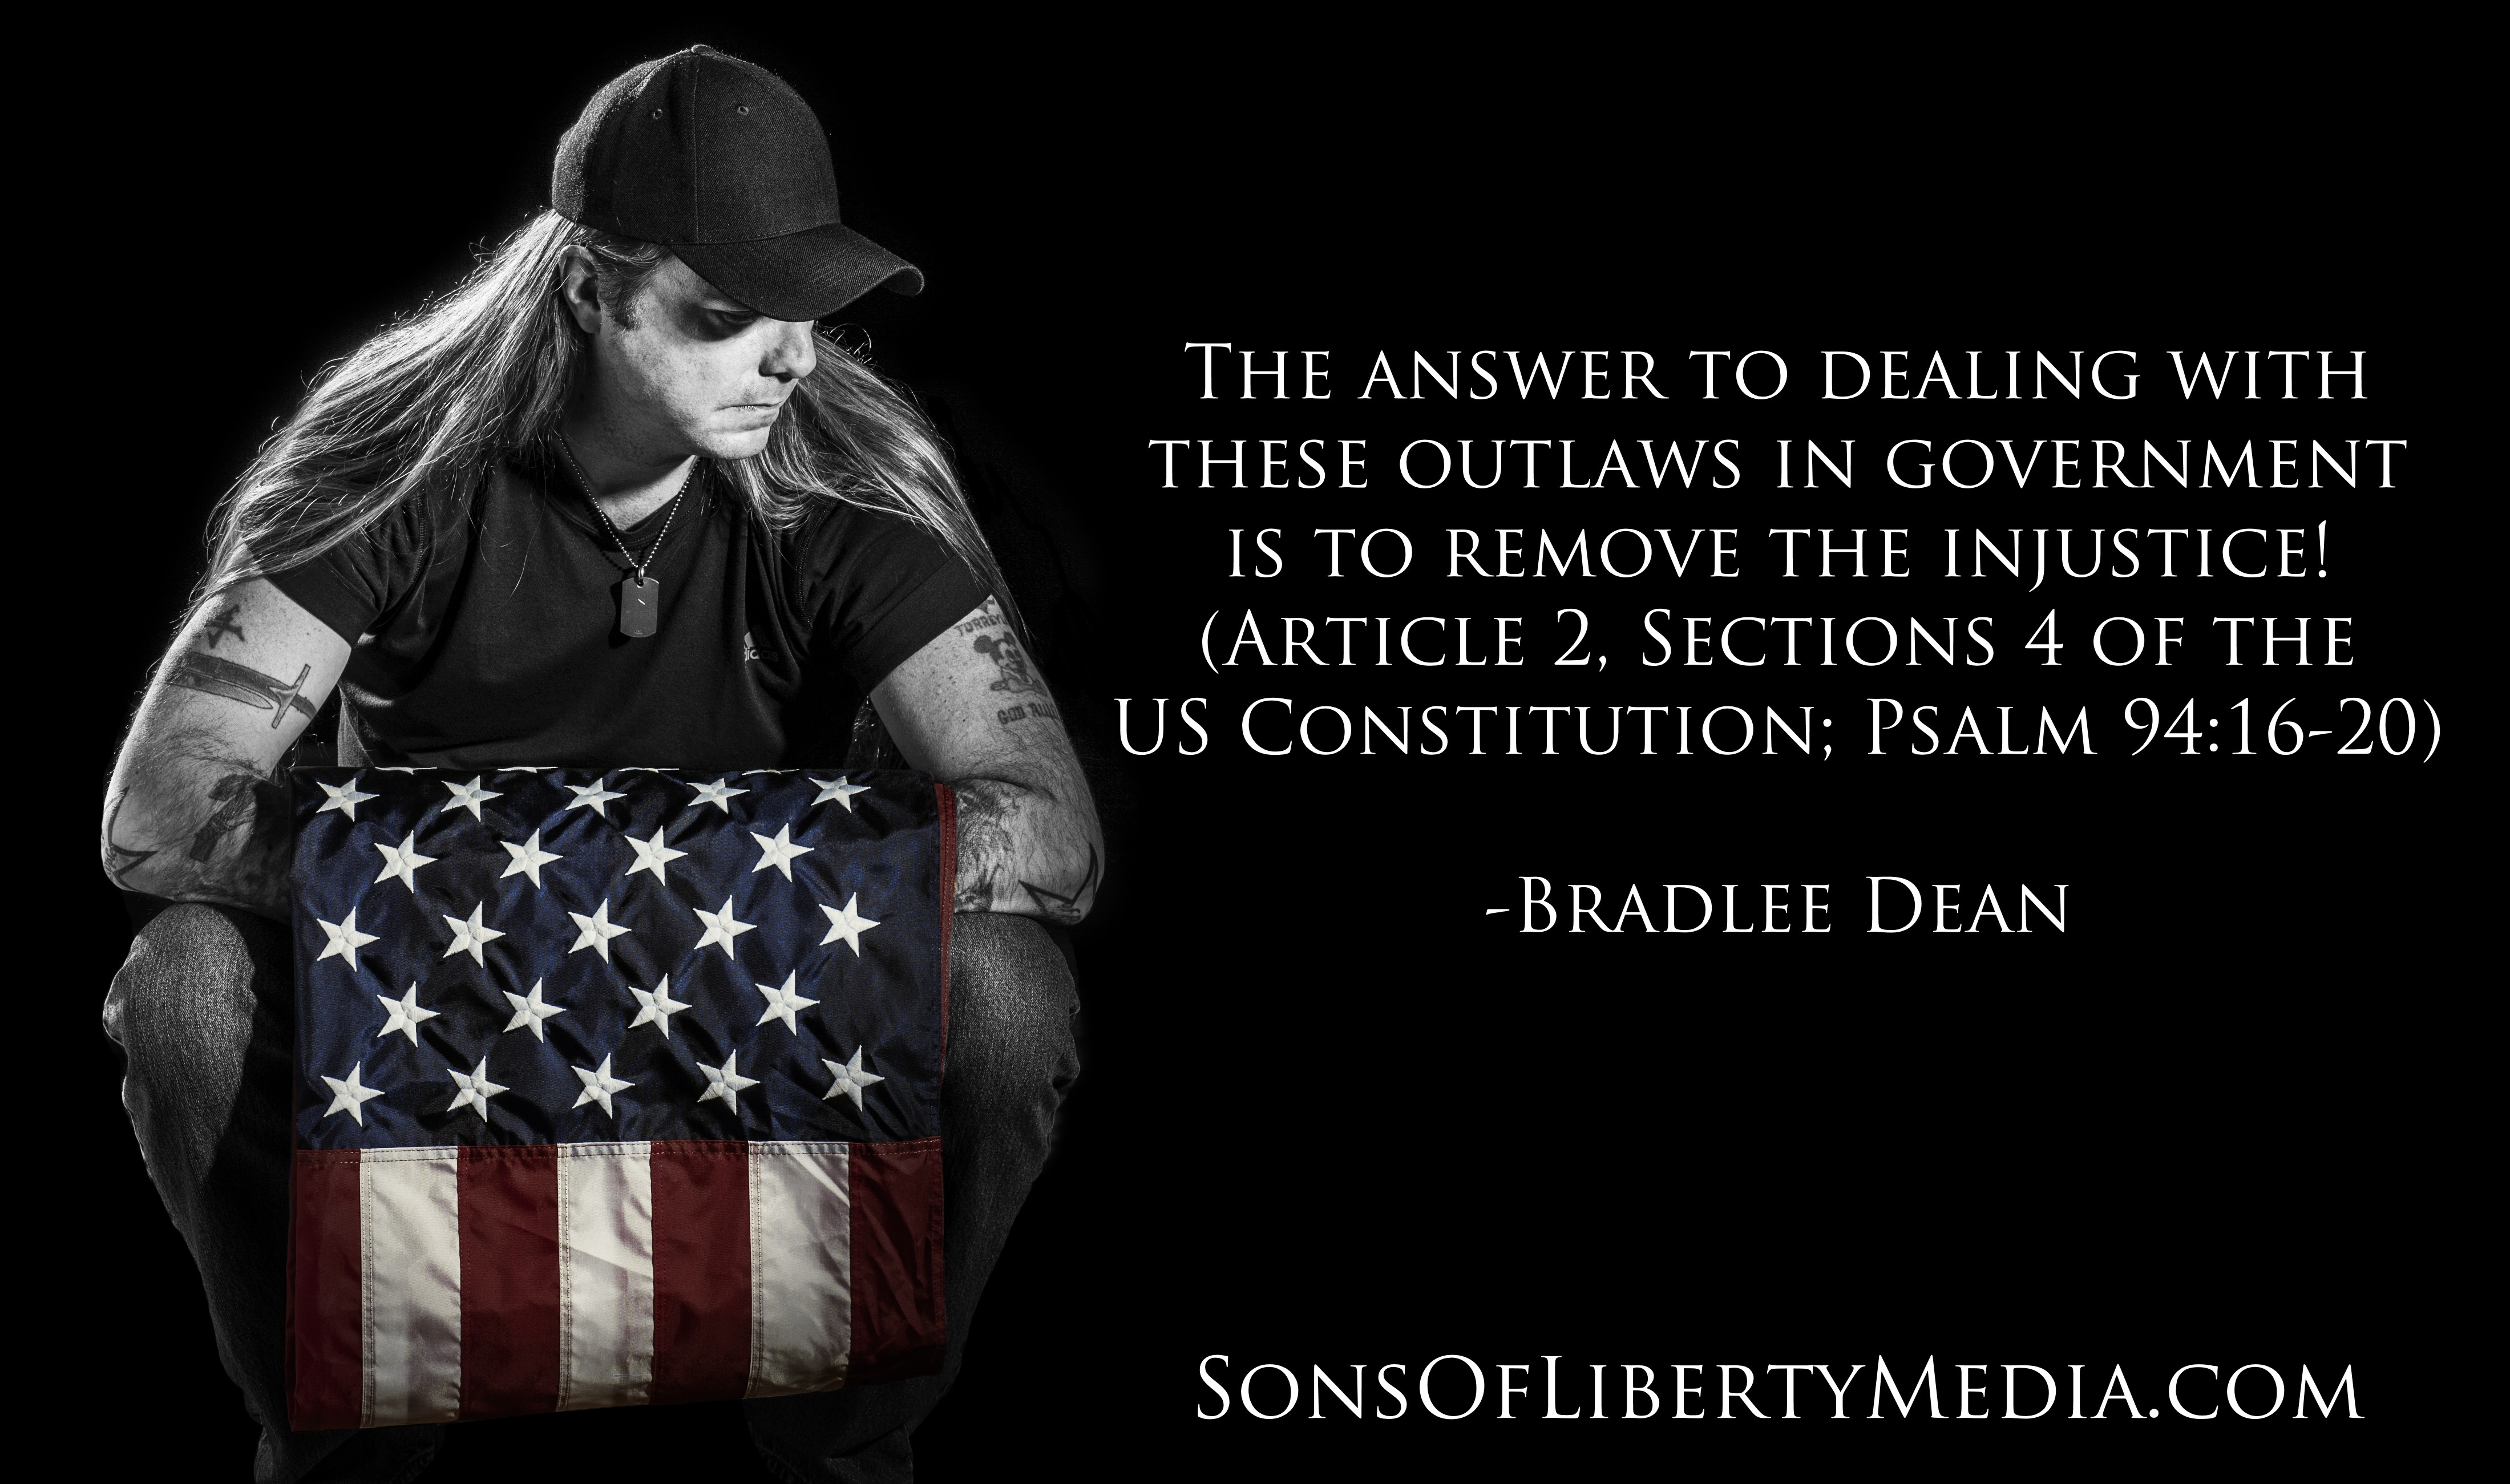 The answer to dealing with outlaws in government is to remove the injustice.